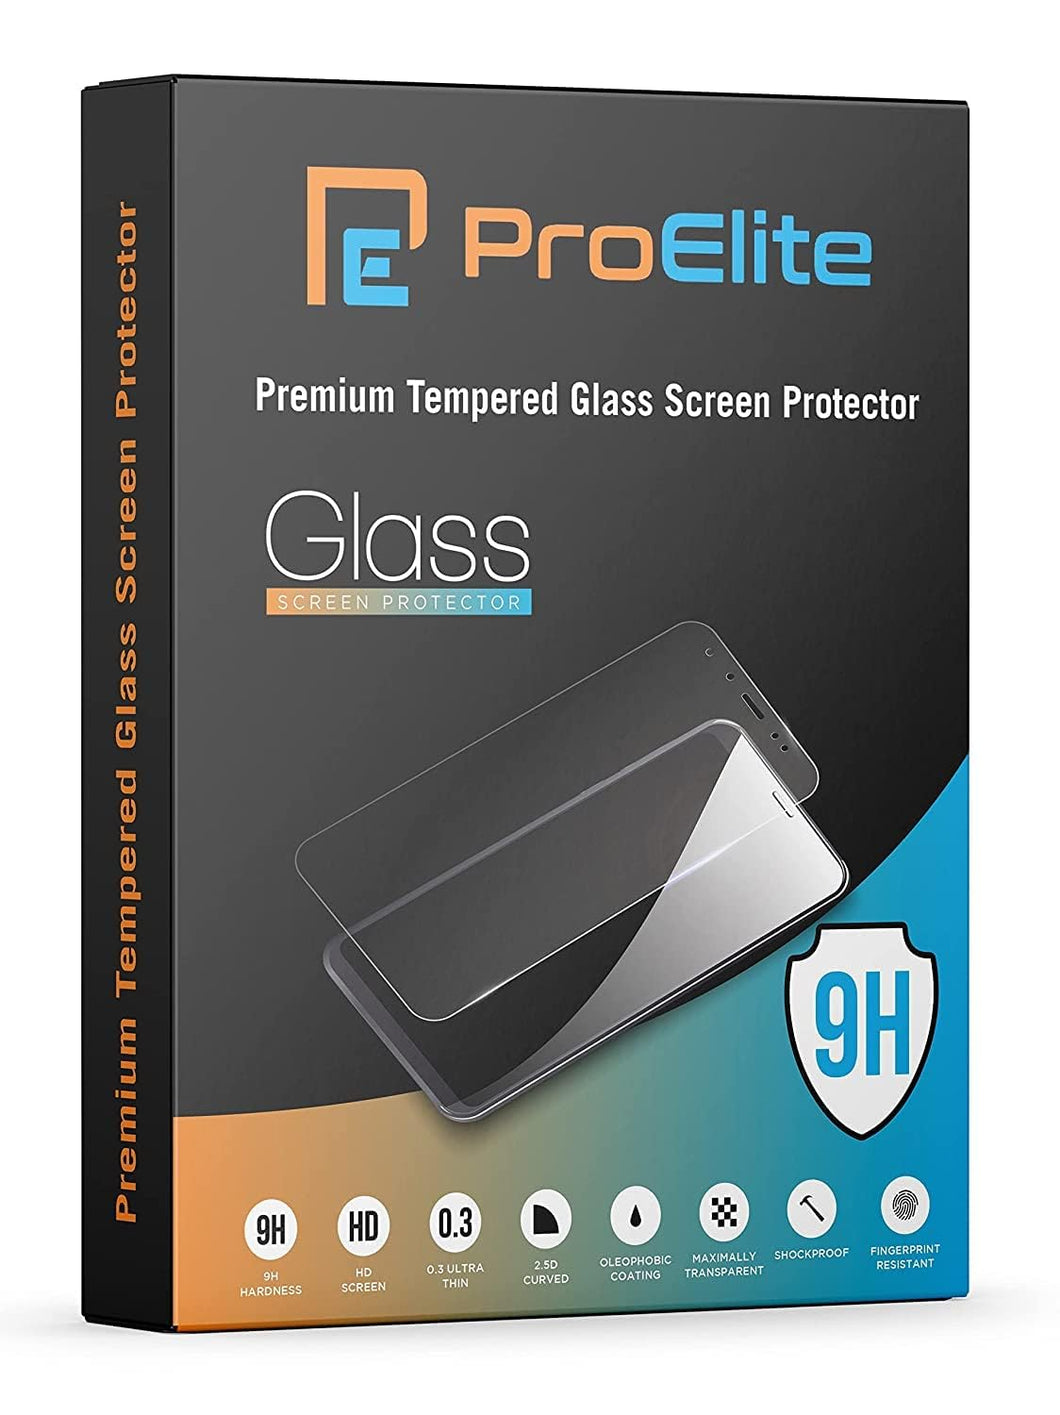 [2-Pack] ProElite Premium Tempered Glass Screen Protector for Apple iPad 9.7 inch 5th/6th Generation Air 1 Air 2 Pro 9.7